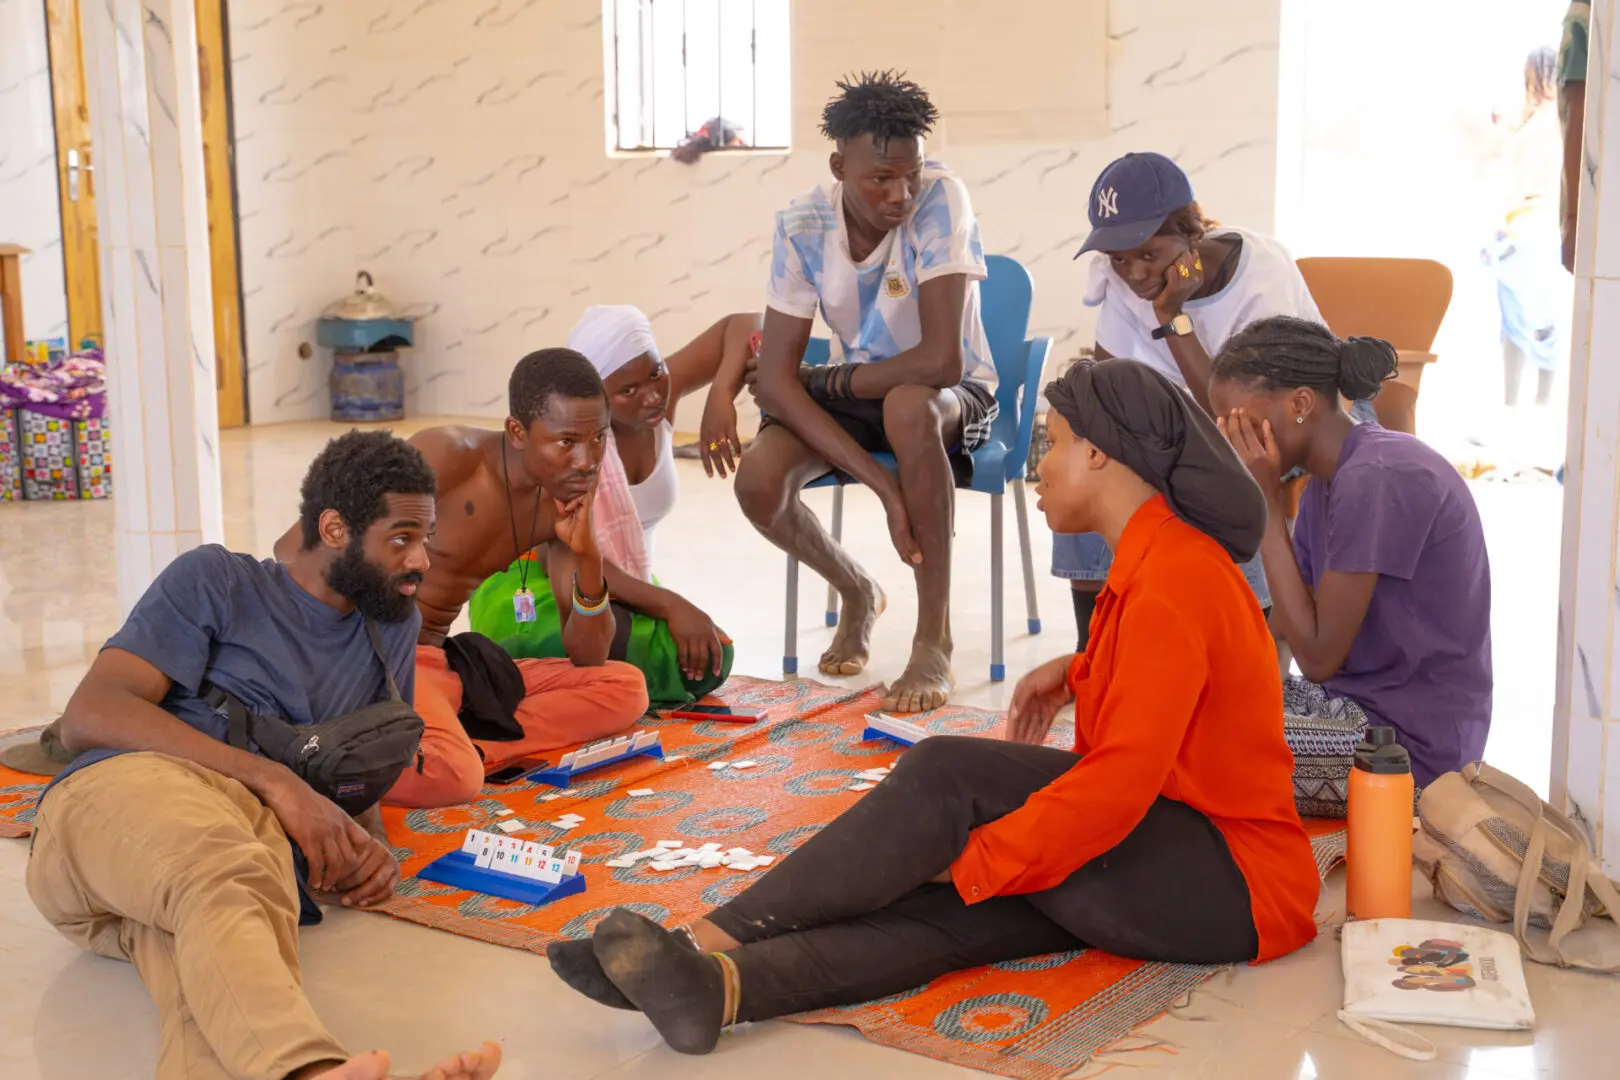 A group of people sitting on the floor playing a game.